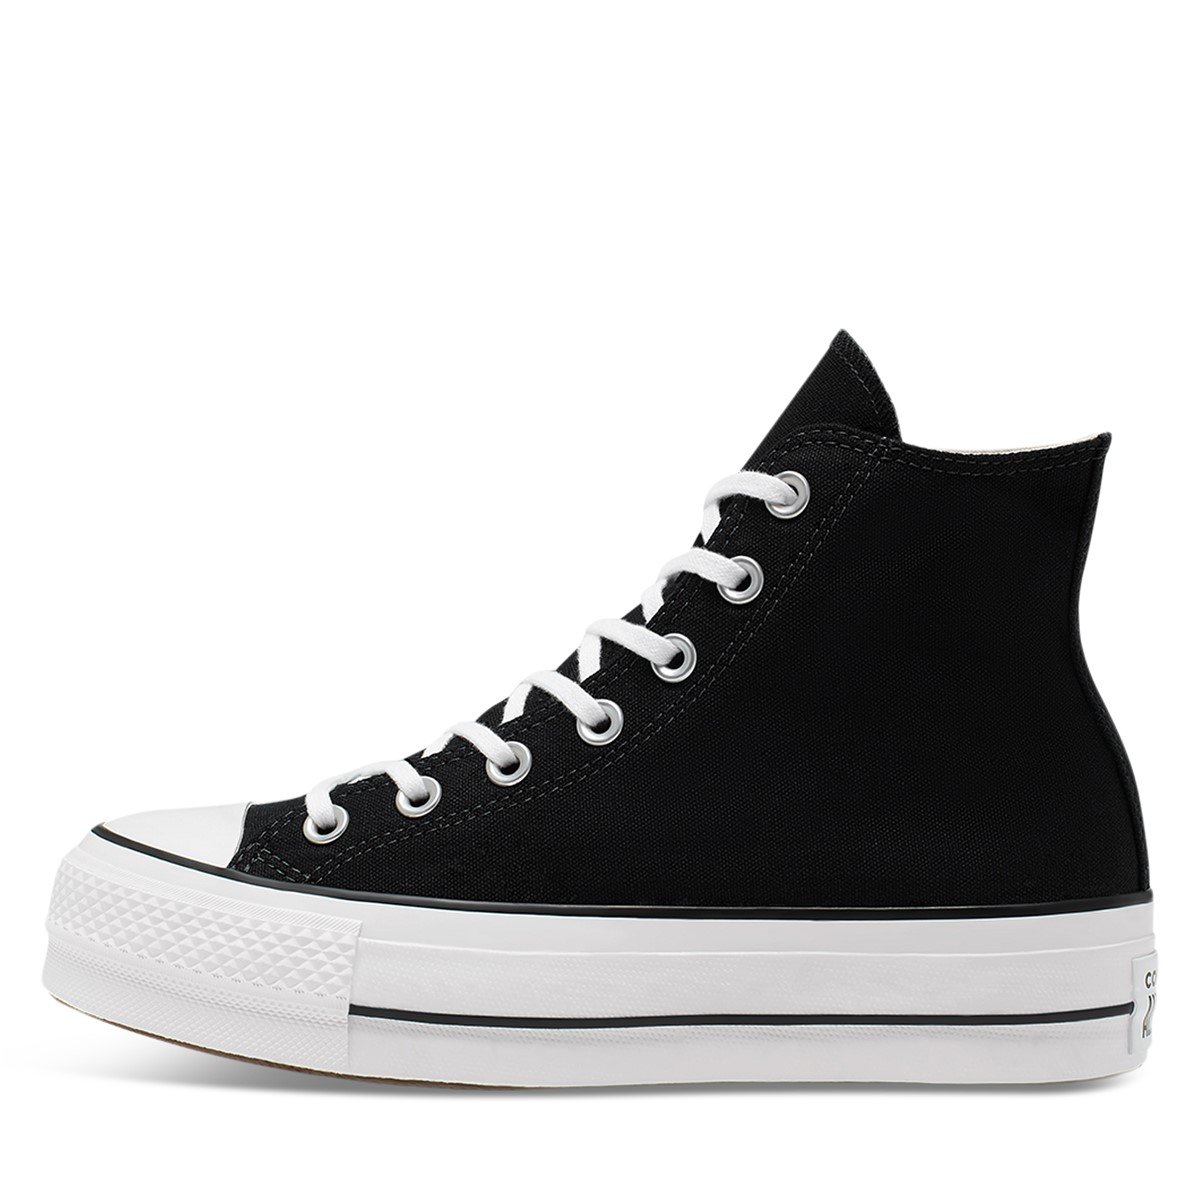 Les Converse All Star, indispensable mode 